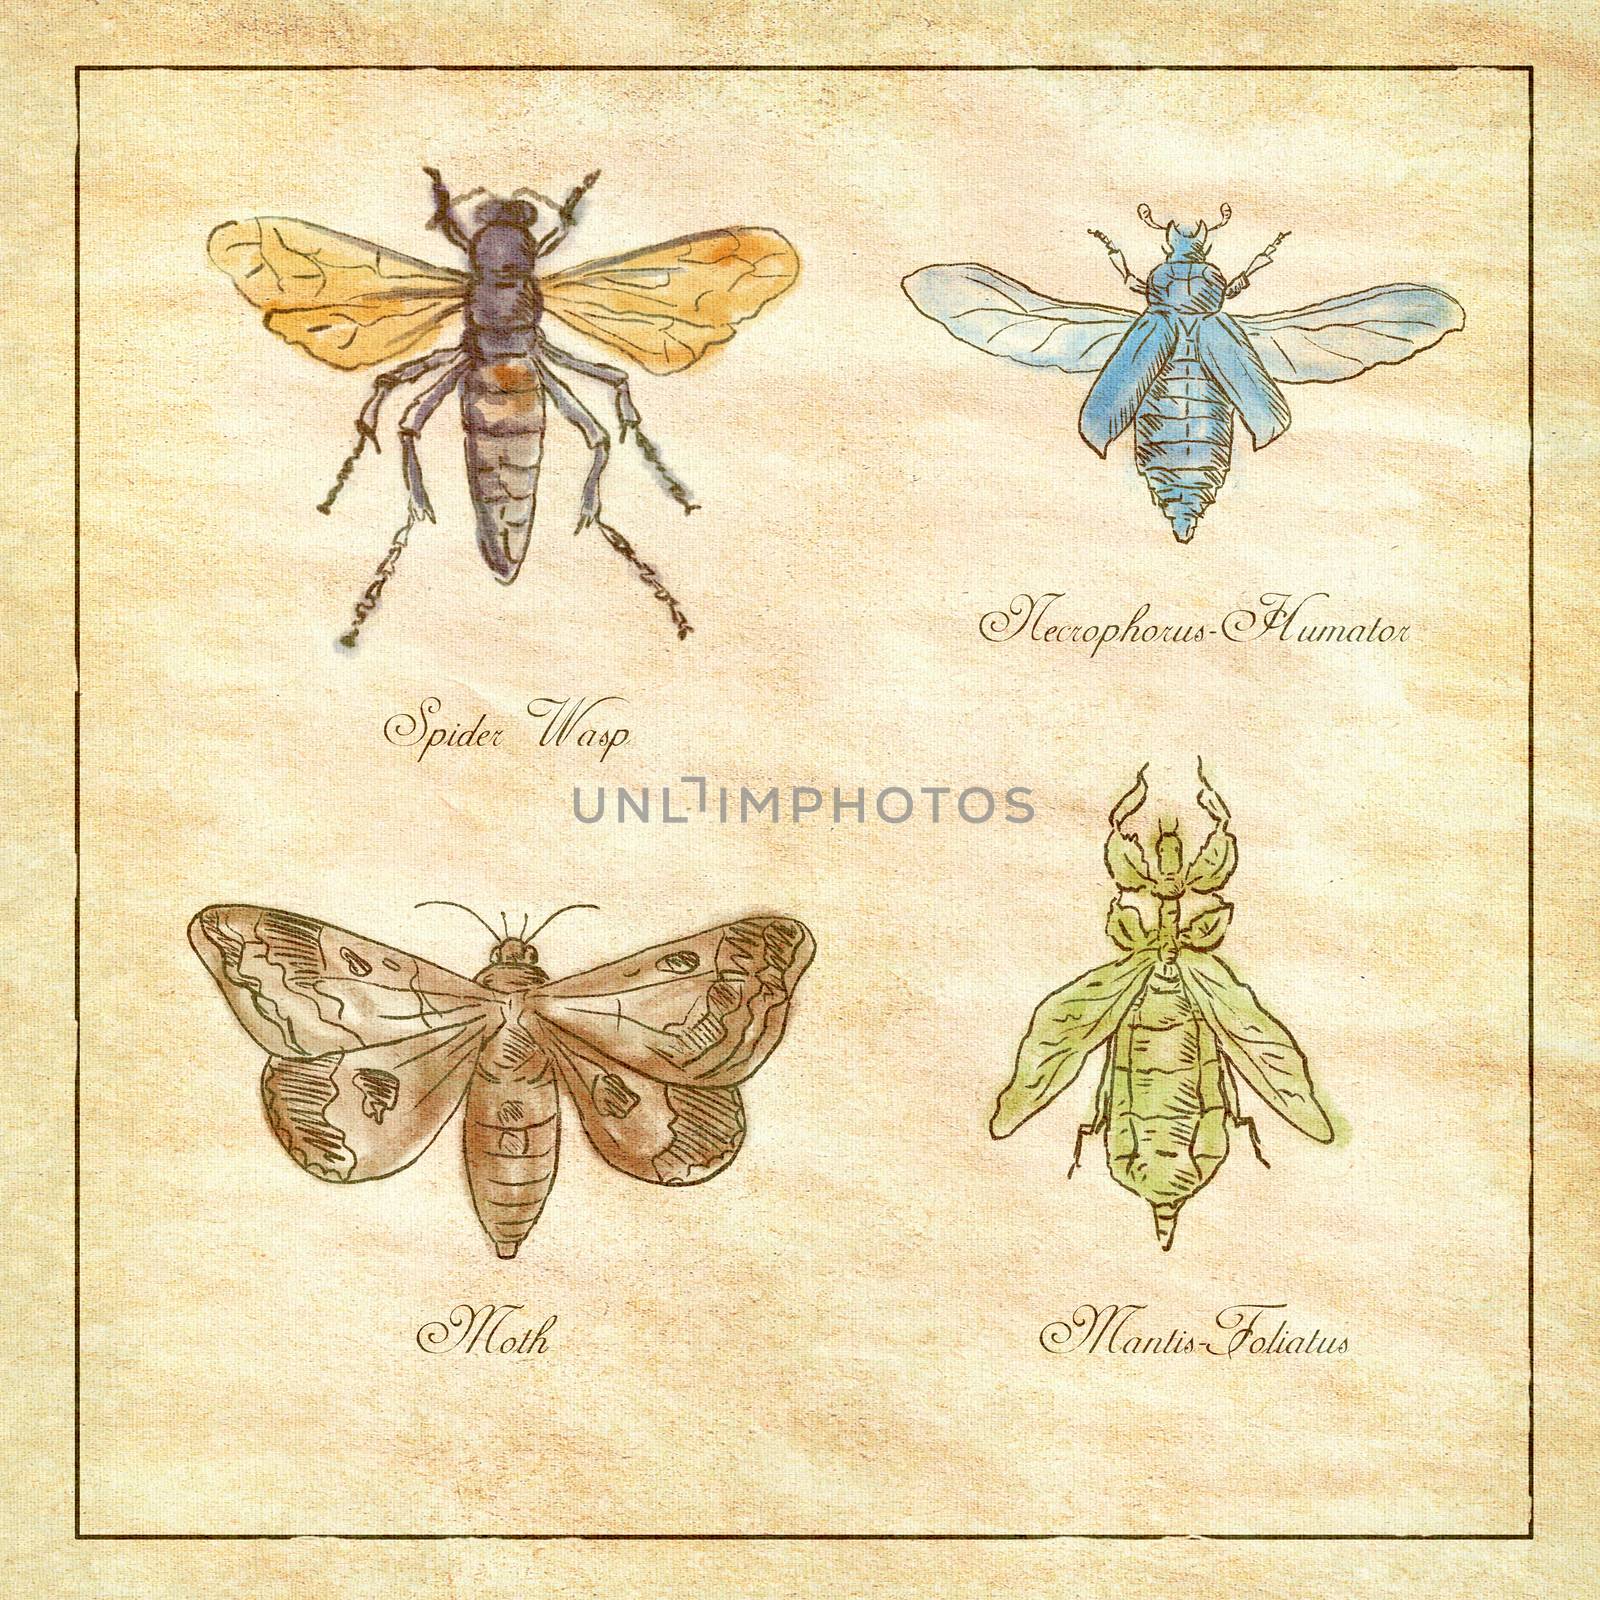 Vintage drawing illustration of a collection of insects like the Spider Wasp, Moth, Necrophorus Humator beetle, Mantis Foliatus on antique paper.